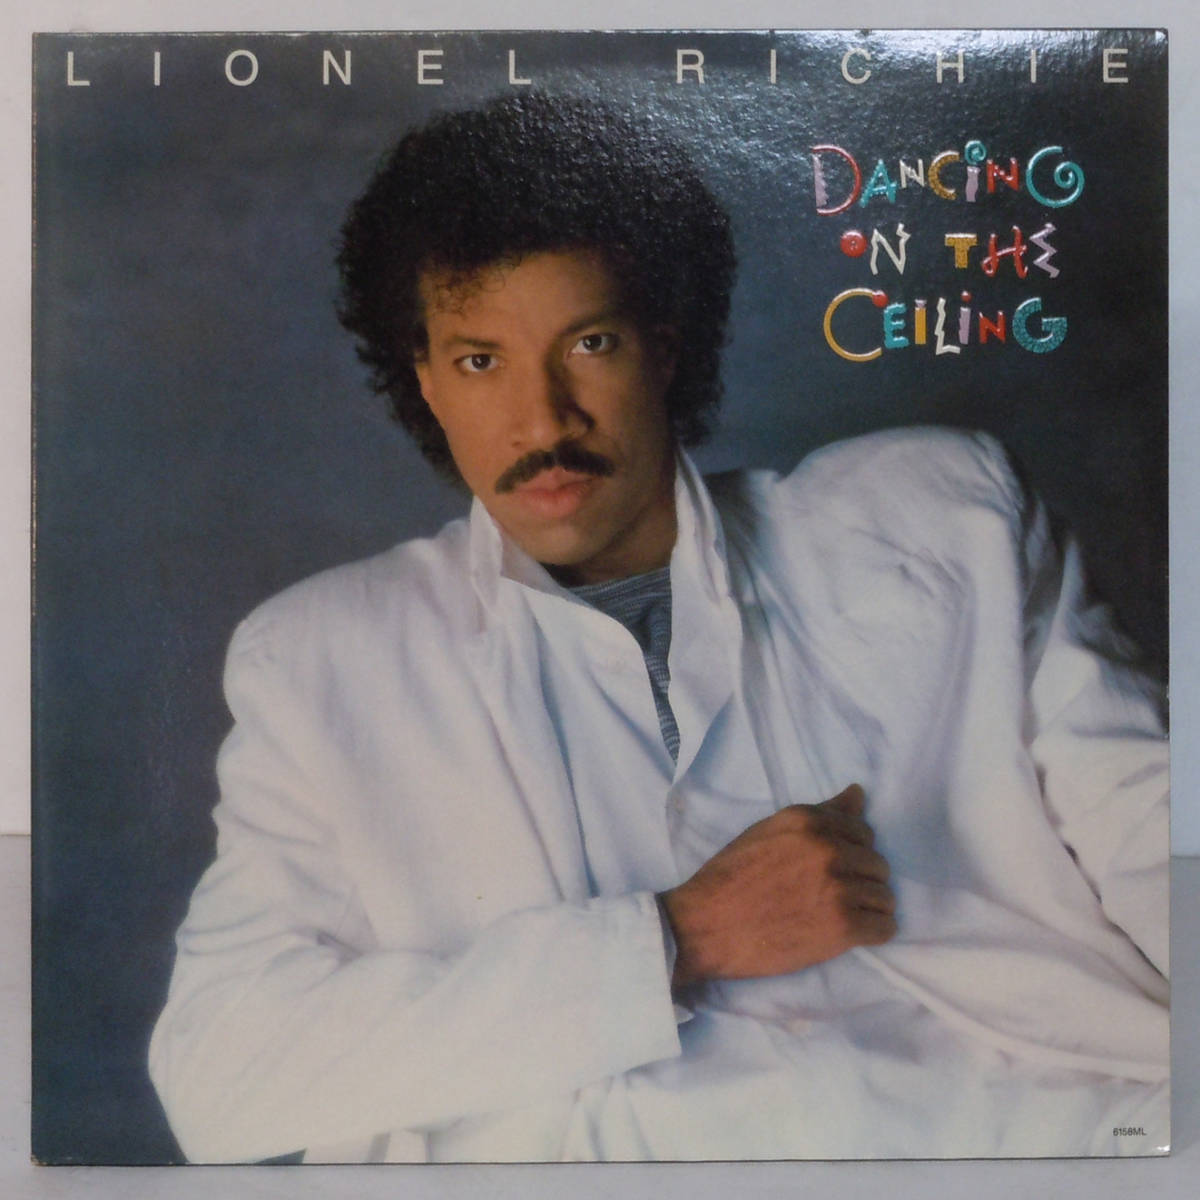 90413i US盤12LP★ LIONEL RICHIE / DANCING ON THE CEILING ★ 6158ML_画像1